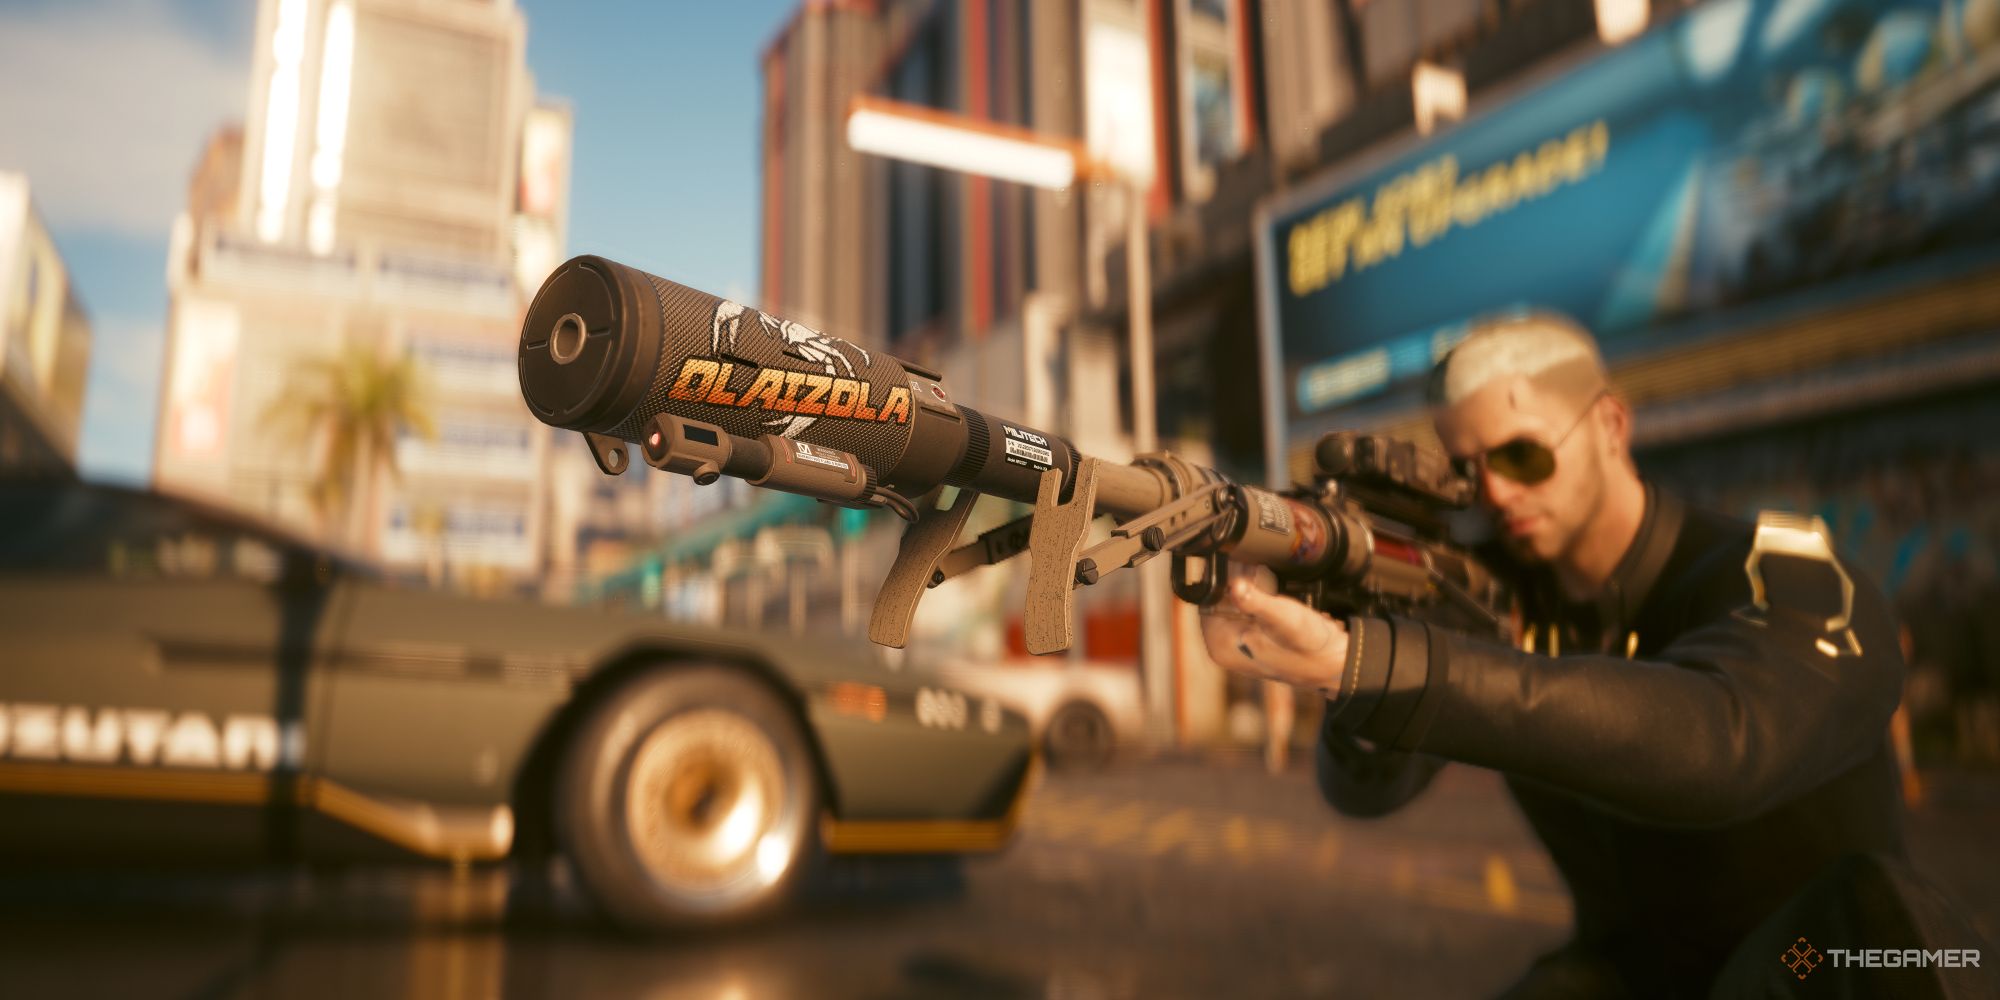 V aiming a sniper rifle with a silencer in Cyberpunk 2077